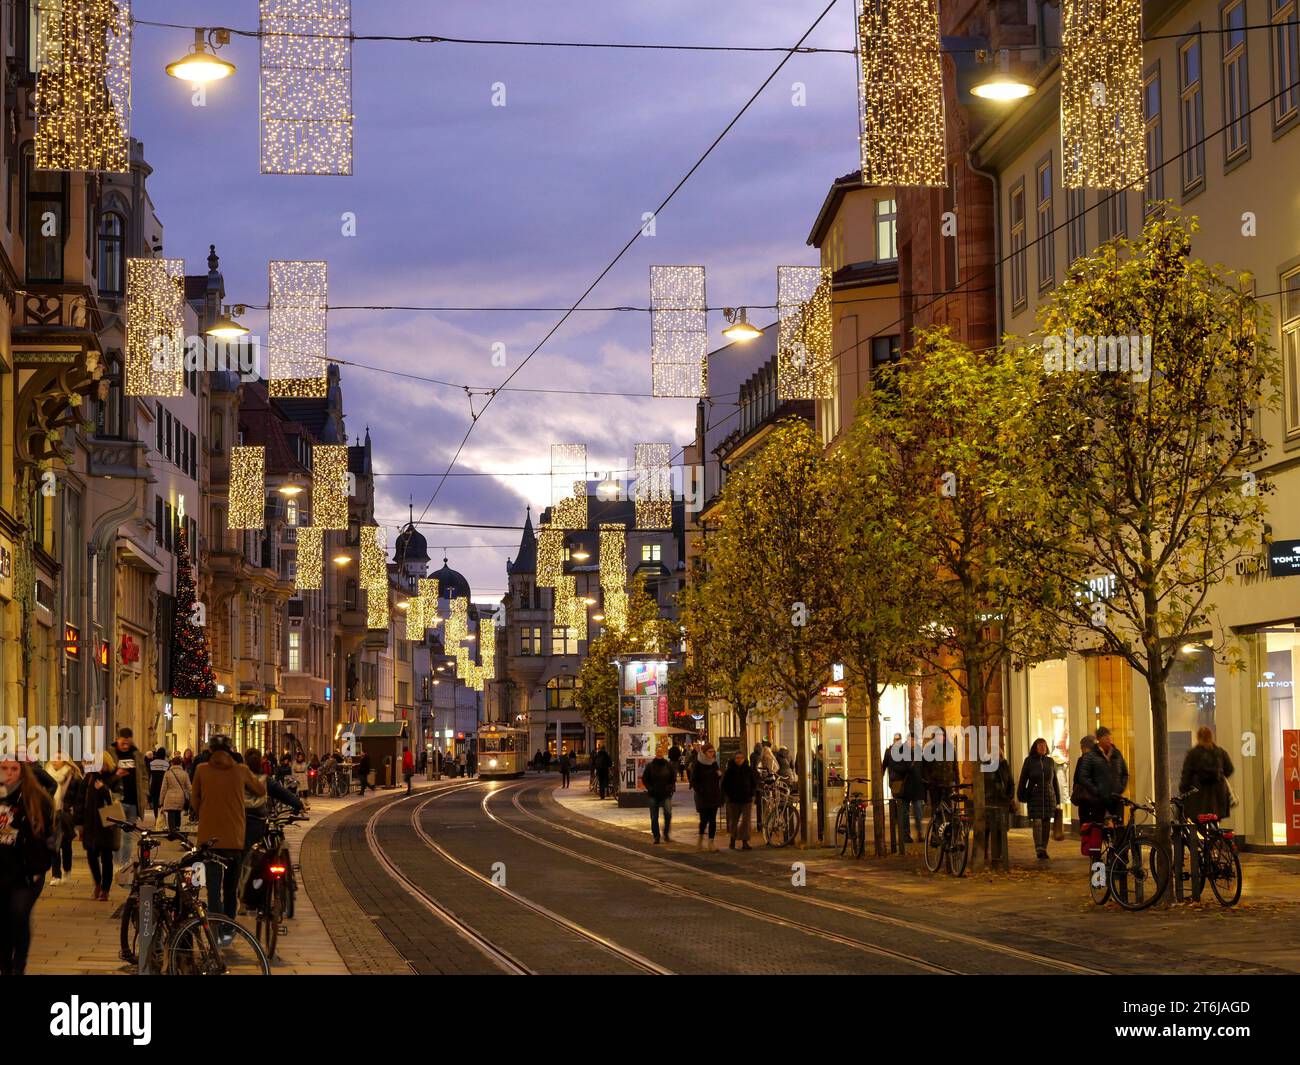 Anger shopping street, decorated for Christmas, Erfurt, Thuringia Stock Photo